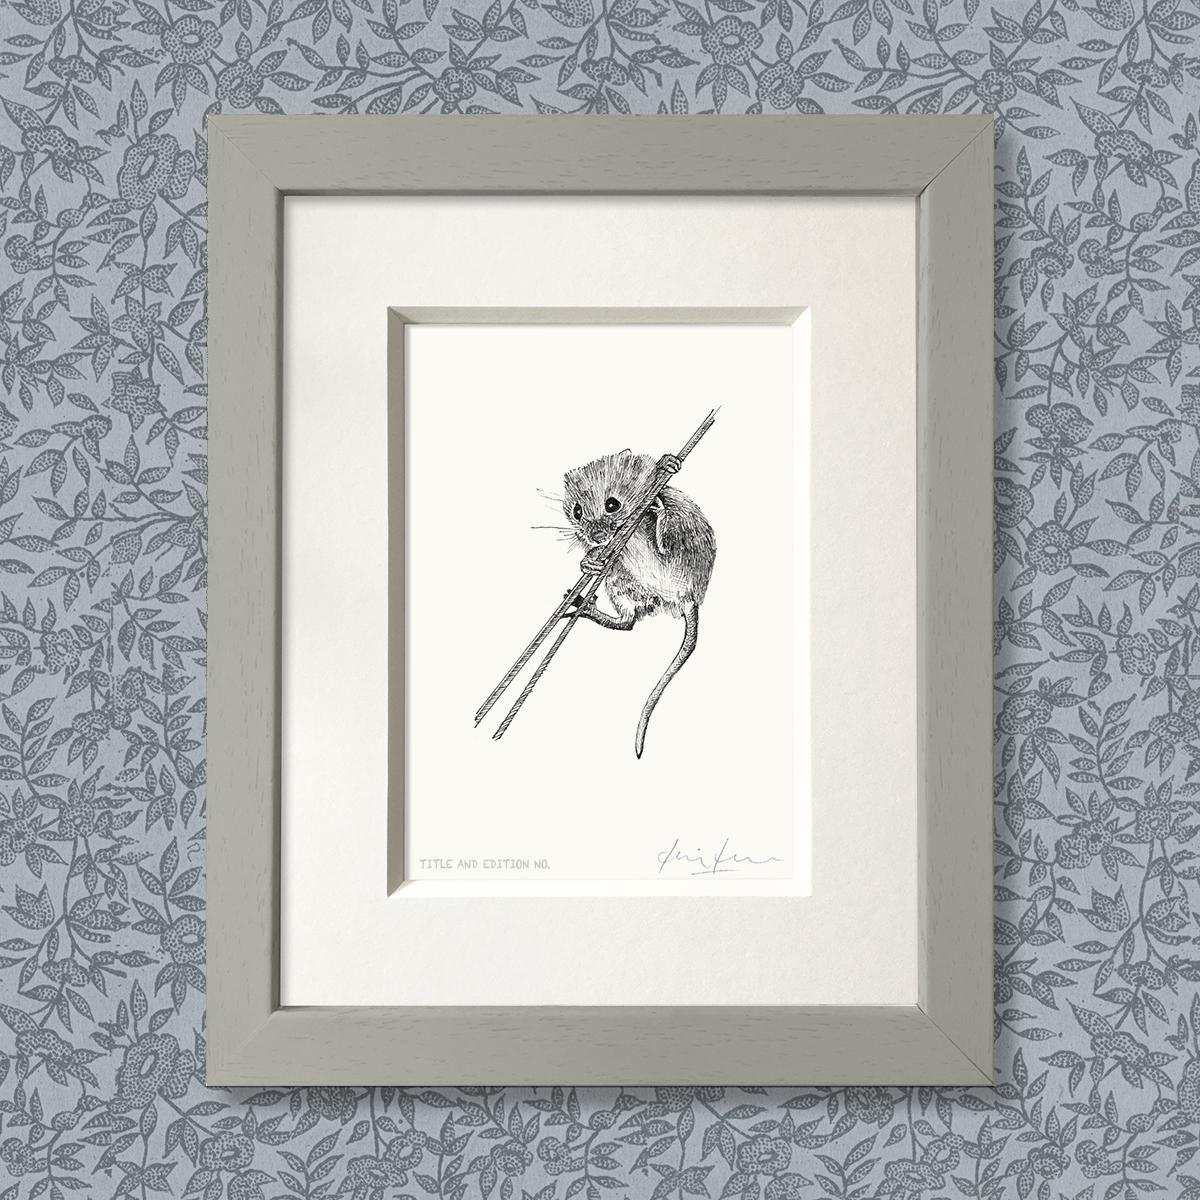 Limited edition print from pen and ink drawing of a harvest mouse in a grey frame